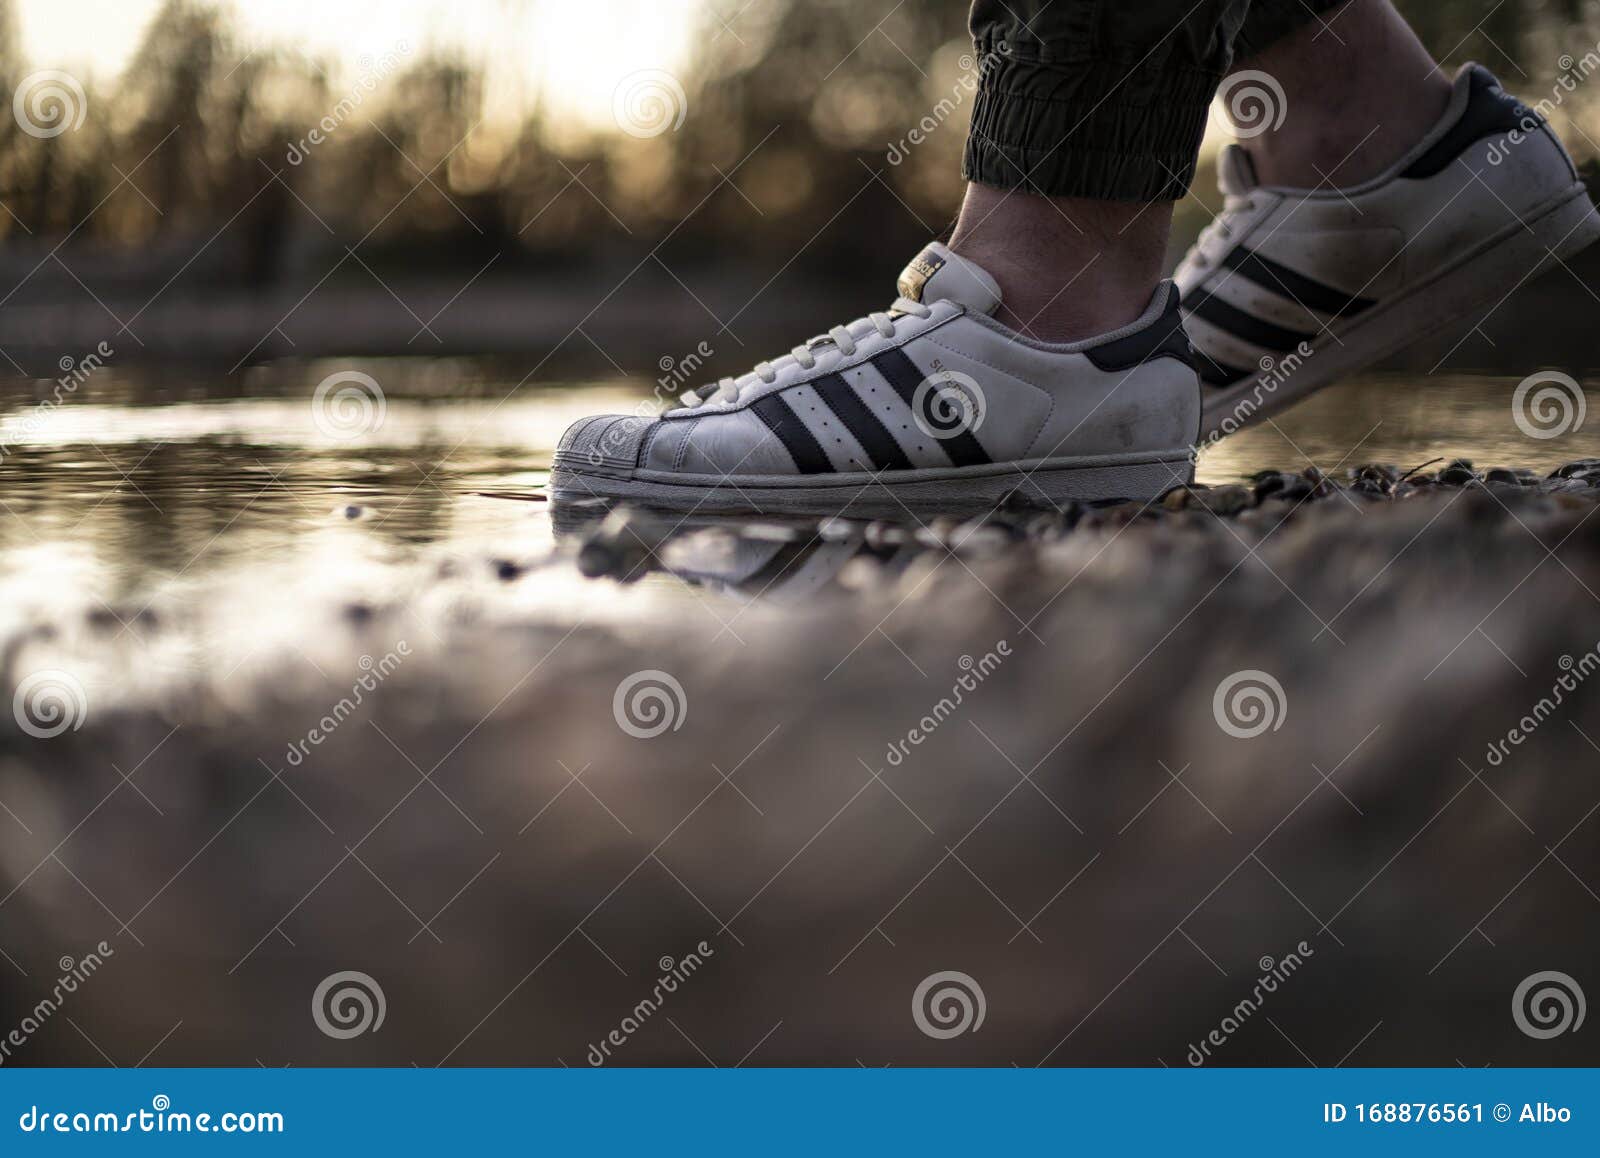 Young Man Wearing an Old Pair of Adidas Superstar Shoes in River Water Editorial Photo - Image of adult, background: 168876561